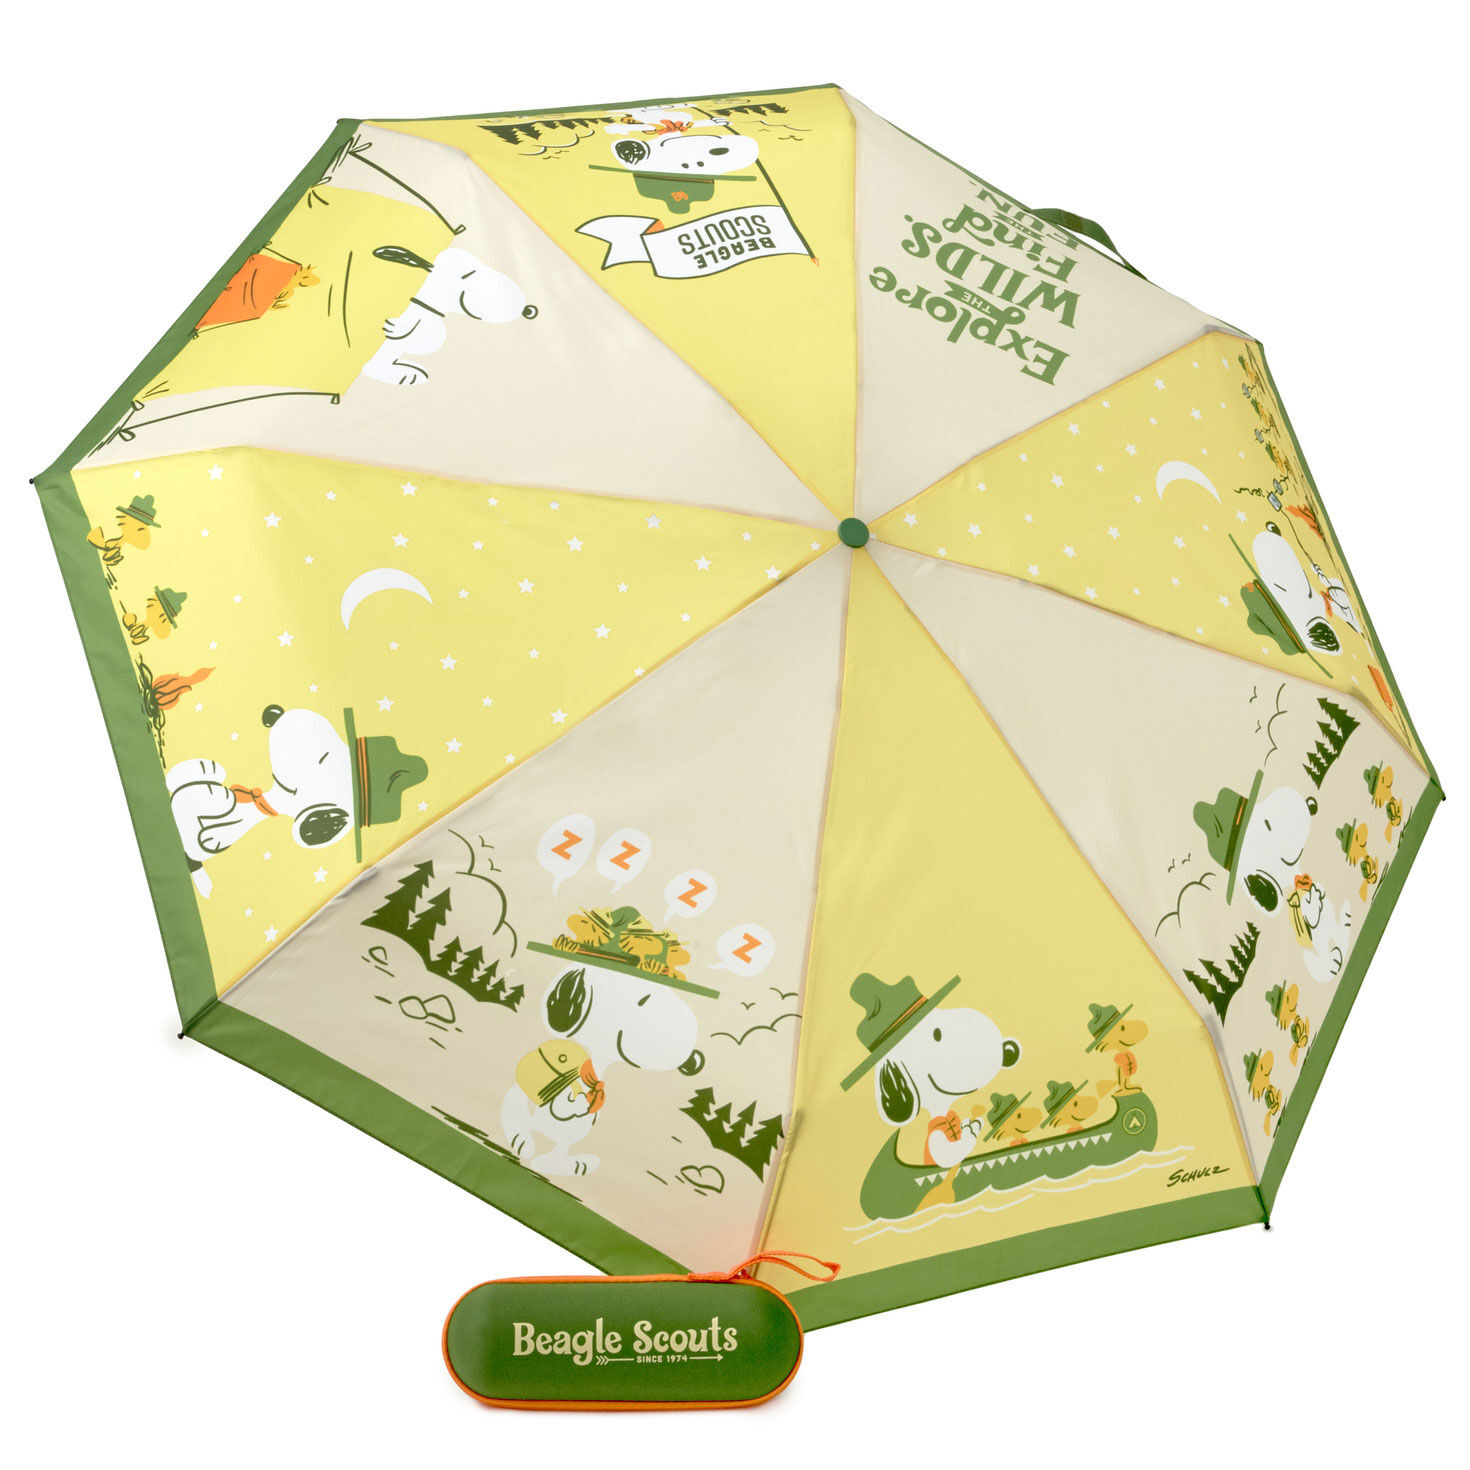 Peanuts® Beagle Scouts Find the Fun Umbrella With Case for only USD 26.99 | Hallmark